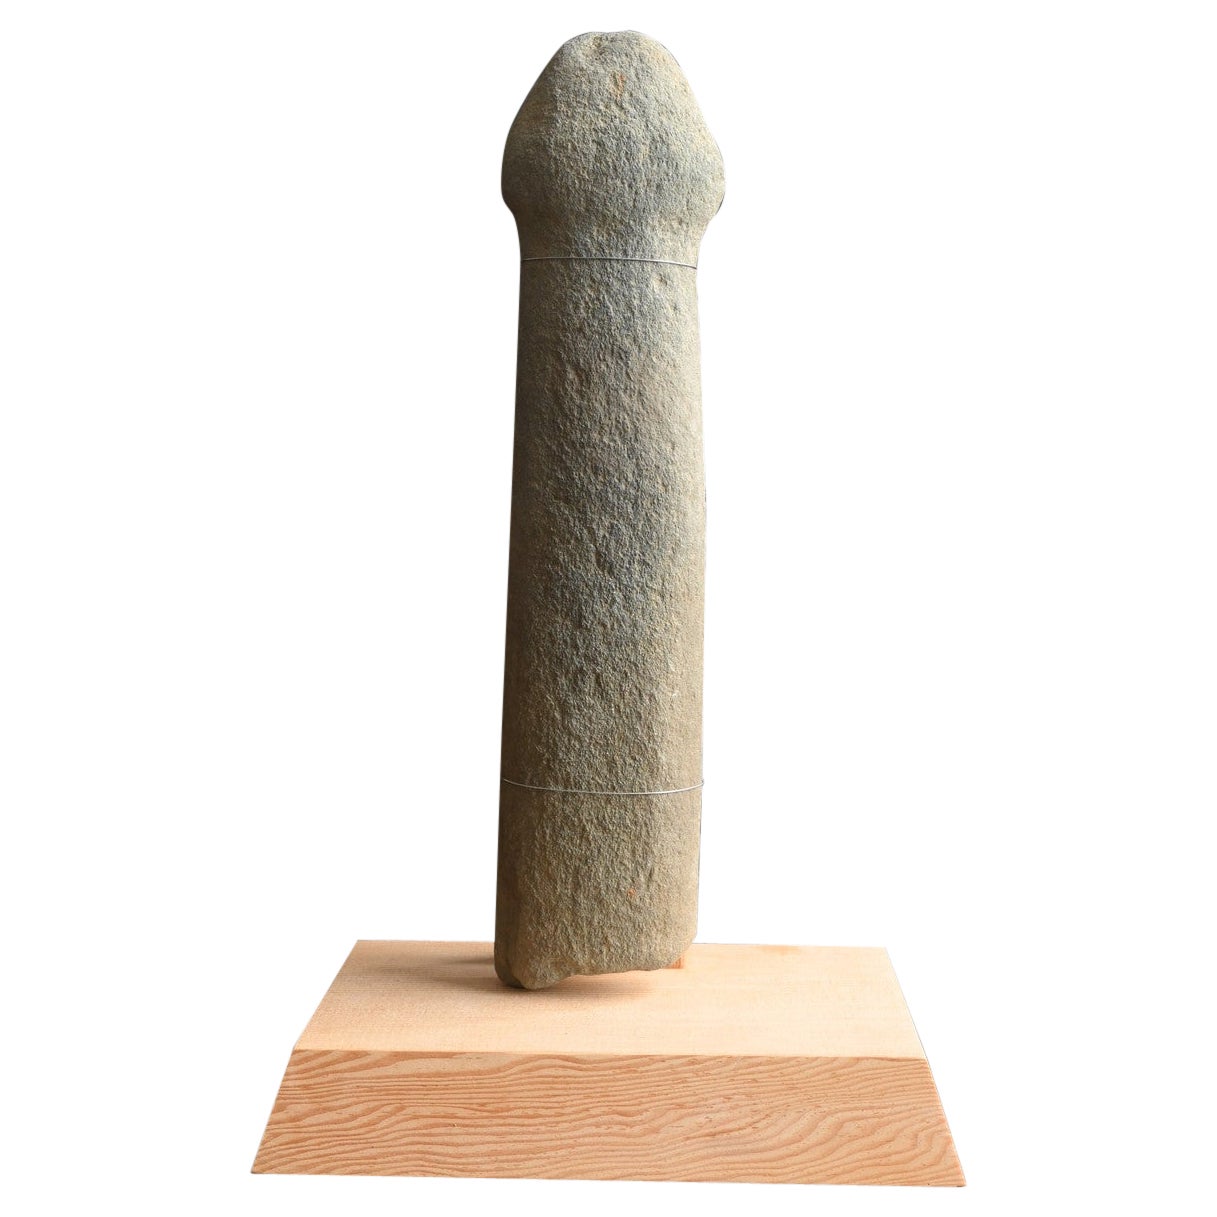 Japanese antique penis-shaped stone ornament/very old excavated item